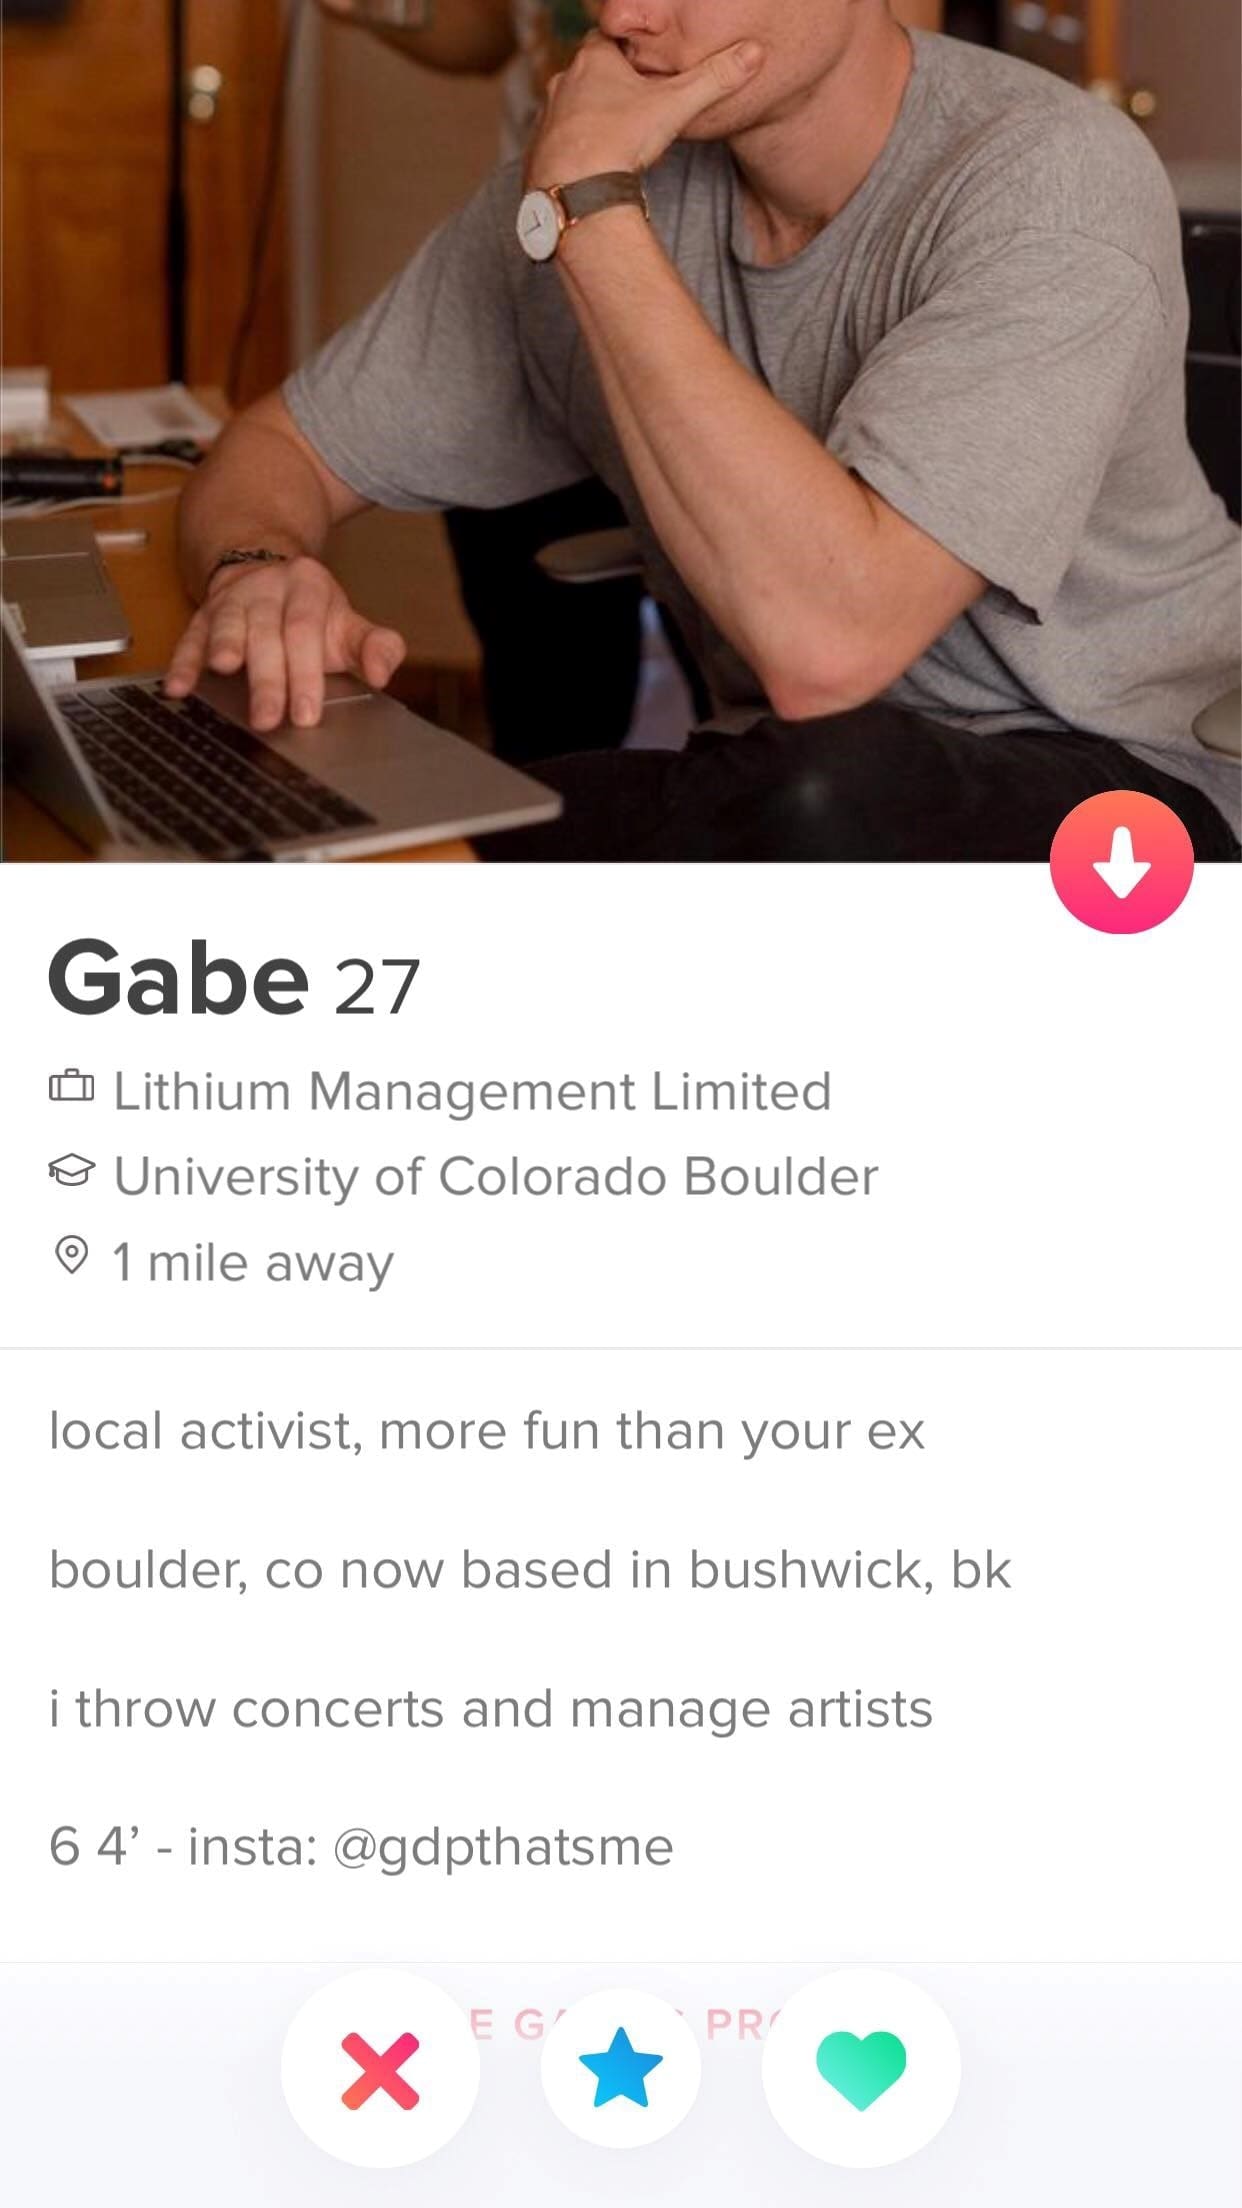 Funny tinder profiles for guys